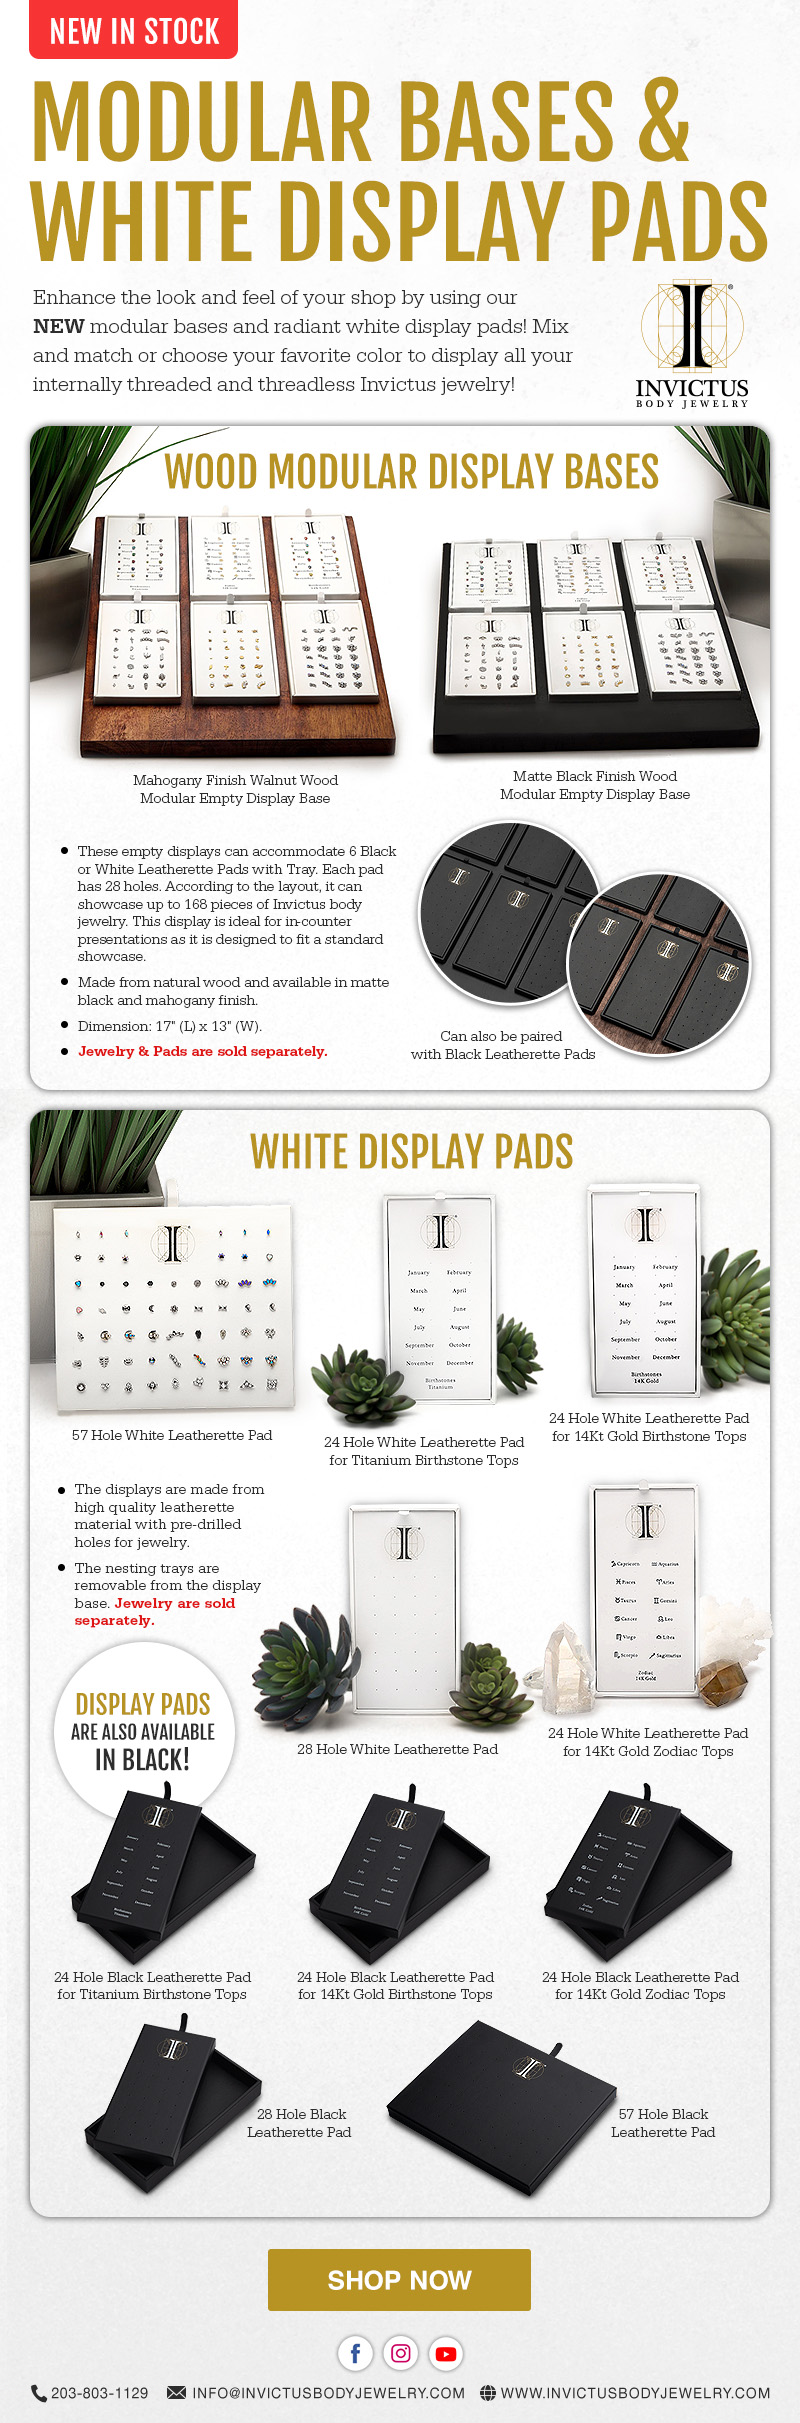 New In Stock - Modular Bases & White Display Pads!